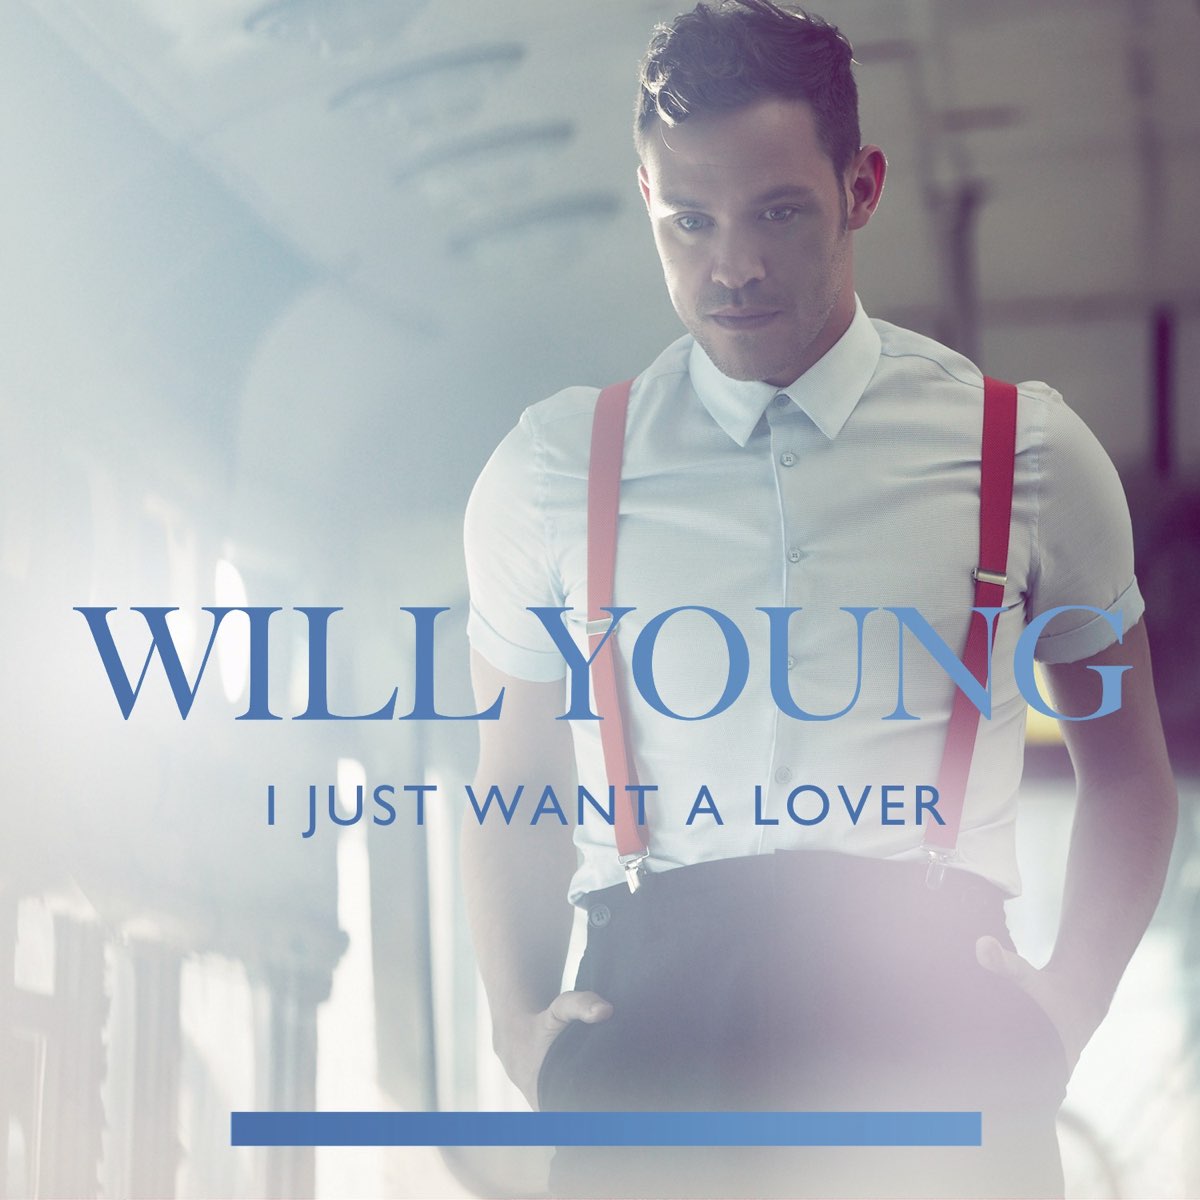 Will young i just want a lover. Lover певец. Will young обложки альбомы. Ловер исполнитель фото. You can just love me